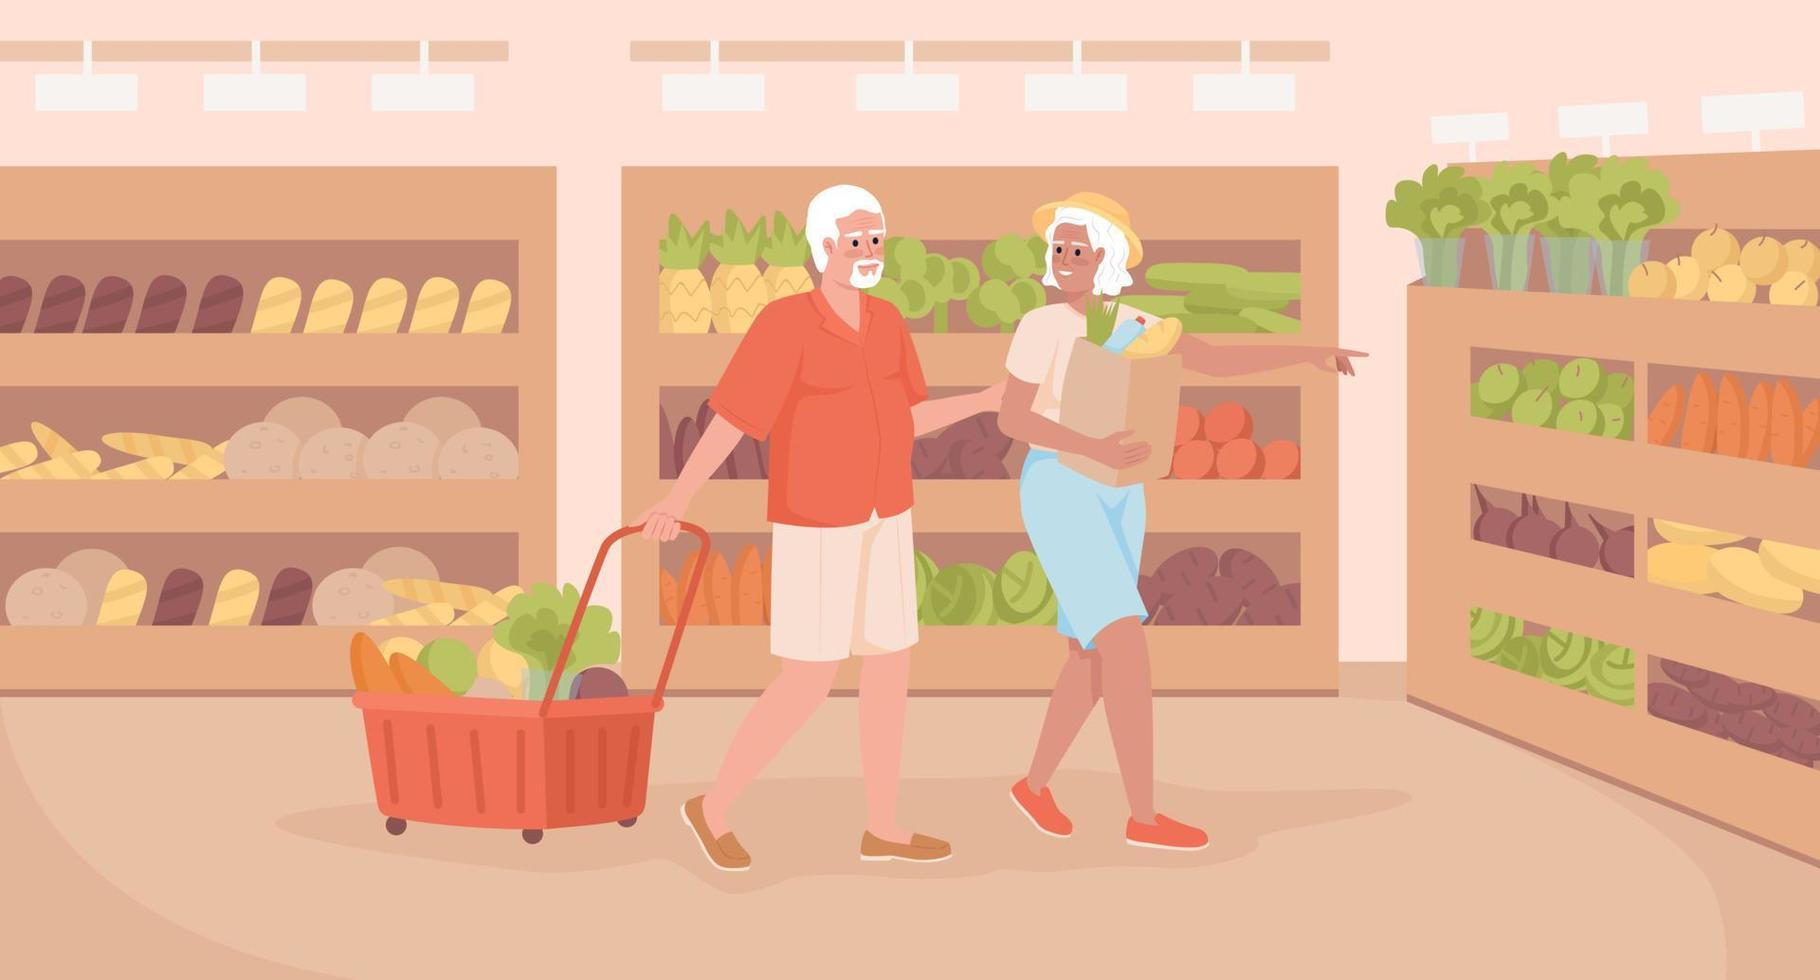 Senior shopping hours flat color vector illustration. Healthy lifestyle. Old couple purchasing vegetables together. Fully editable 2D simple cartoon characters with goods sections on background